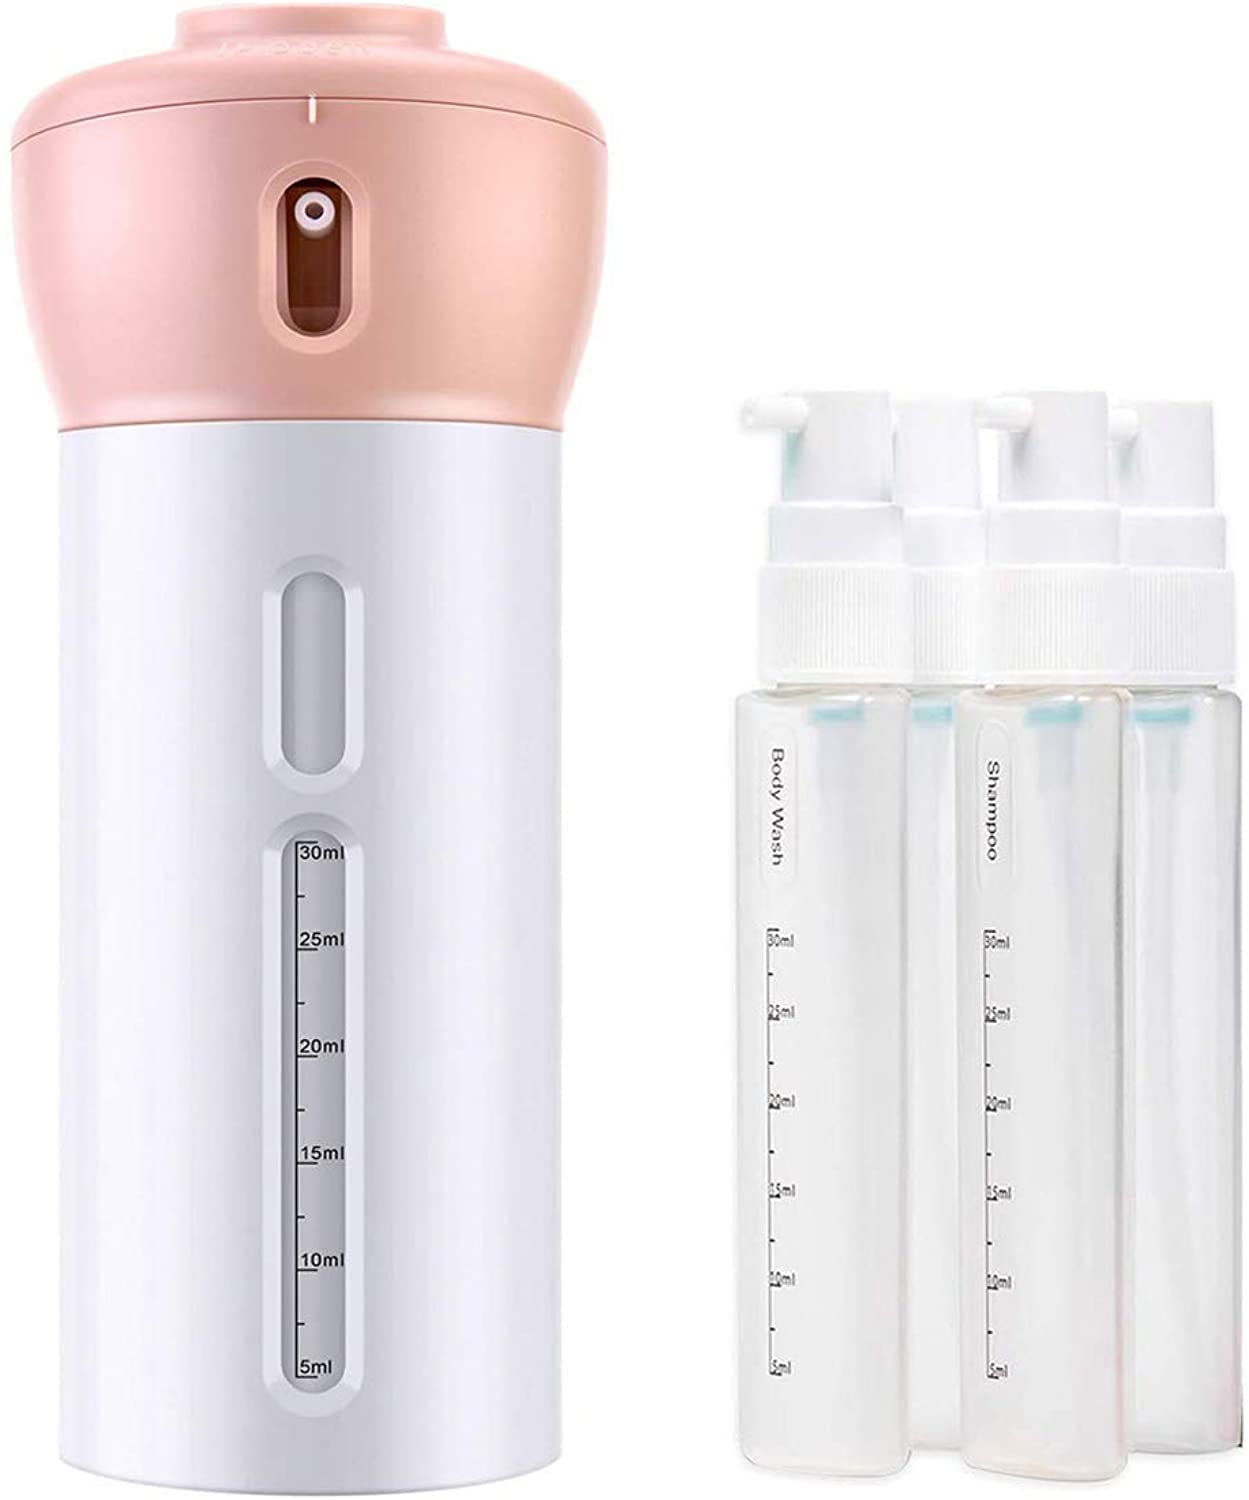 4 In 1Travel Bottles Set, Leak-Proof Travel Bottles Containers Liquid Lotion Cream Container for Shampoo Cosmetics Lotion Conditioner Shower Gel and Toiletries